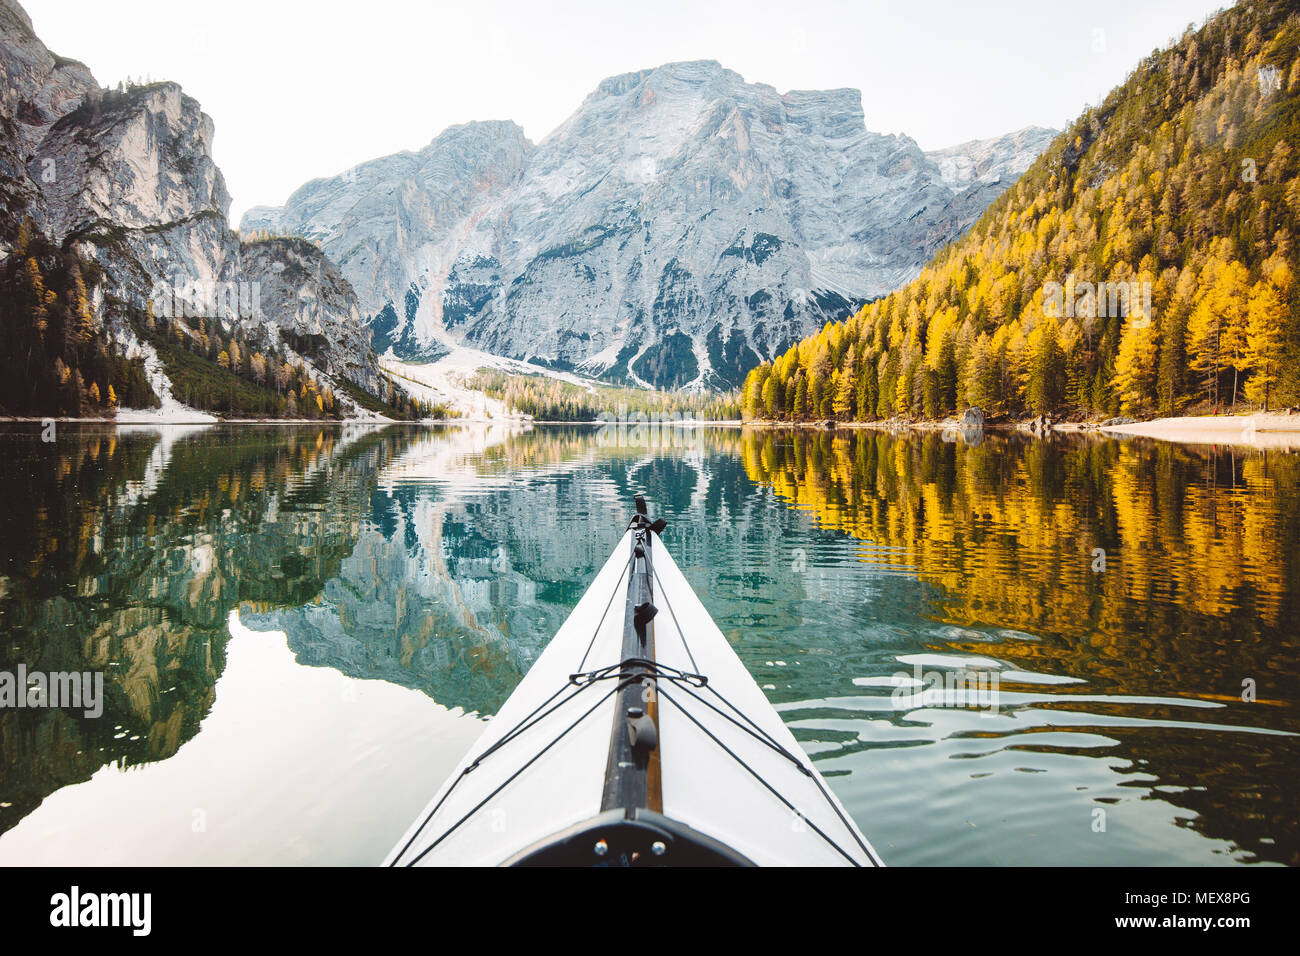 Beautiful view of kayak on a calm lake with amazing reflections of mountain peaks and trees with yellow autumn foliage in fall, Lago di Braies, Italy Stock Photo